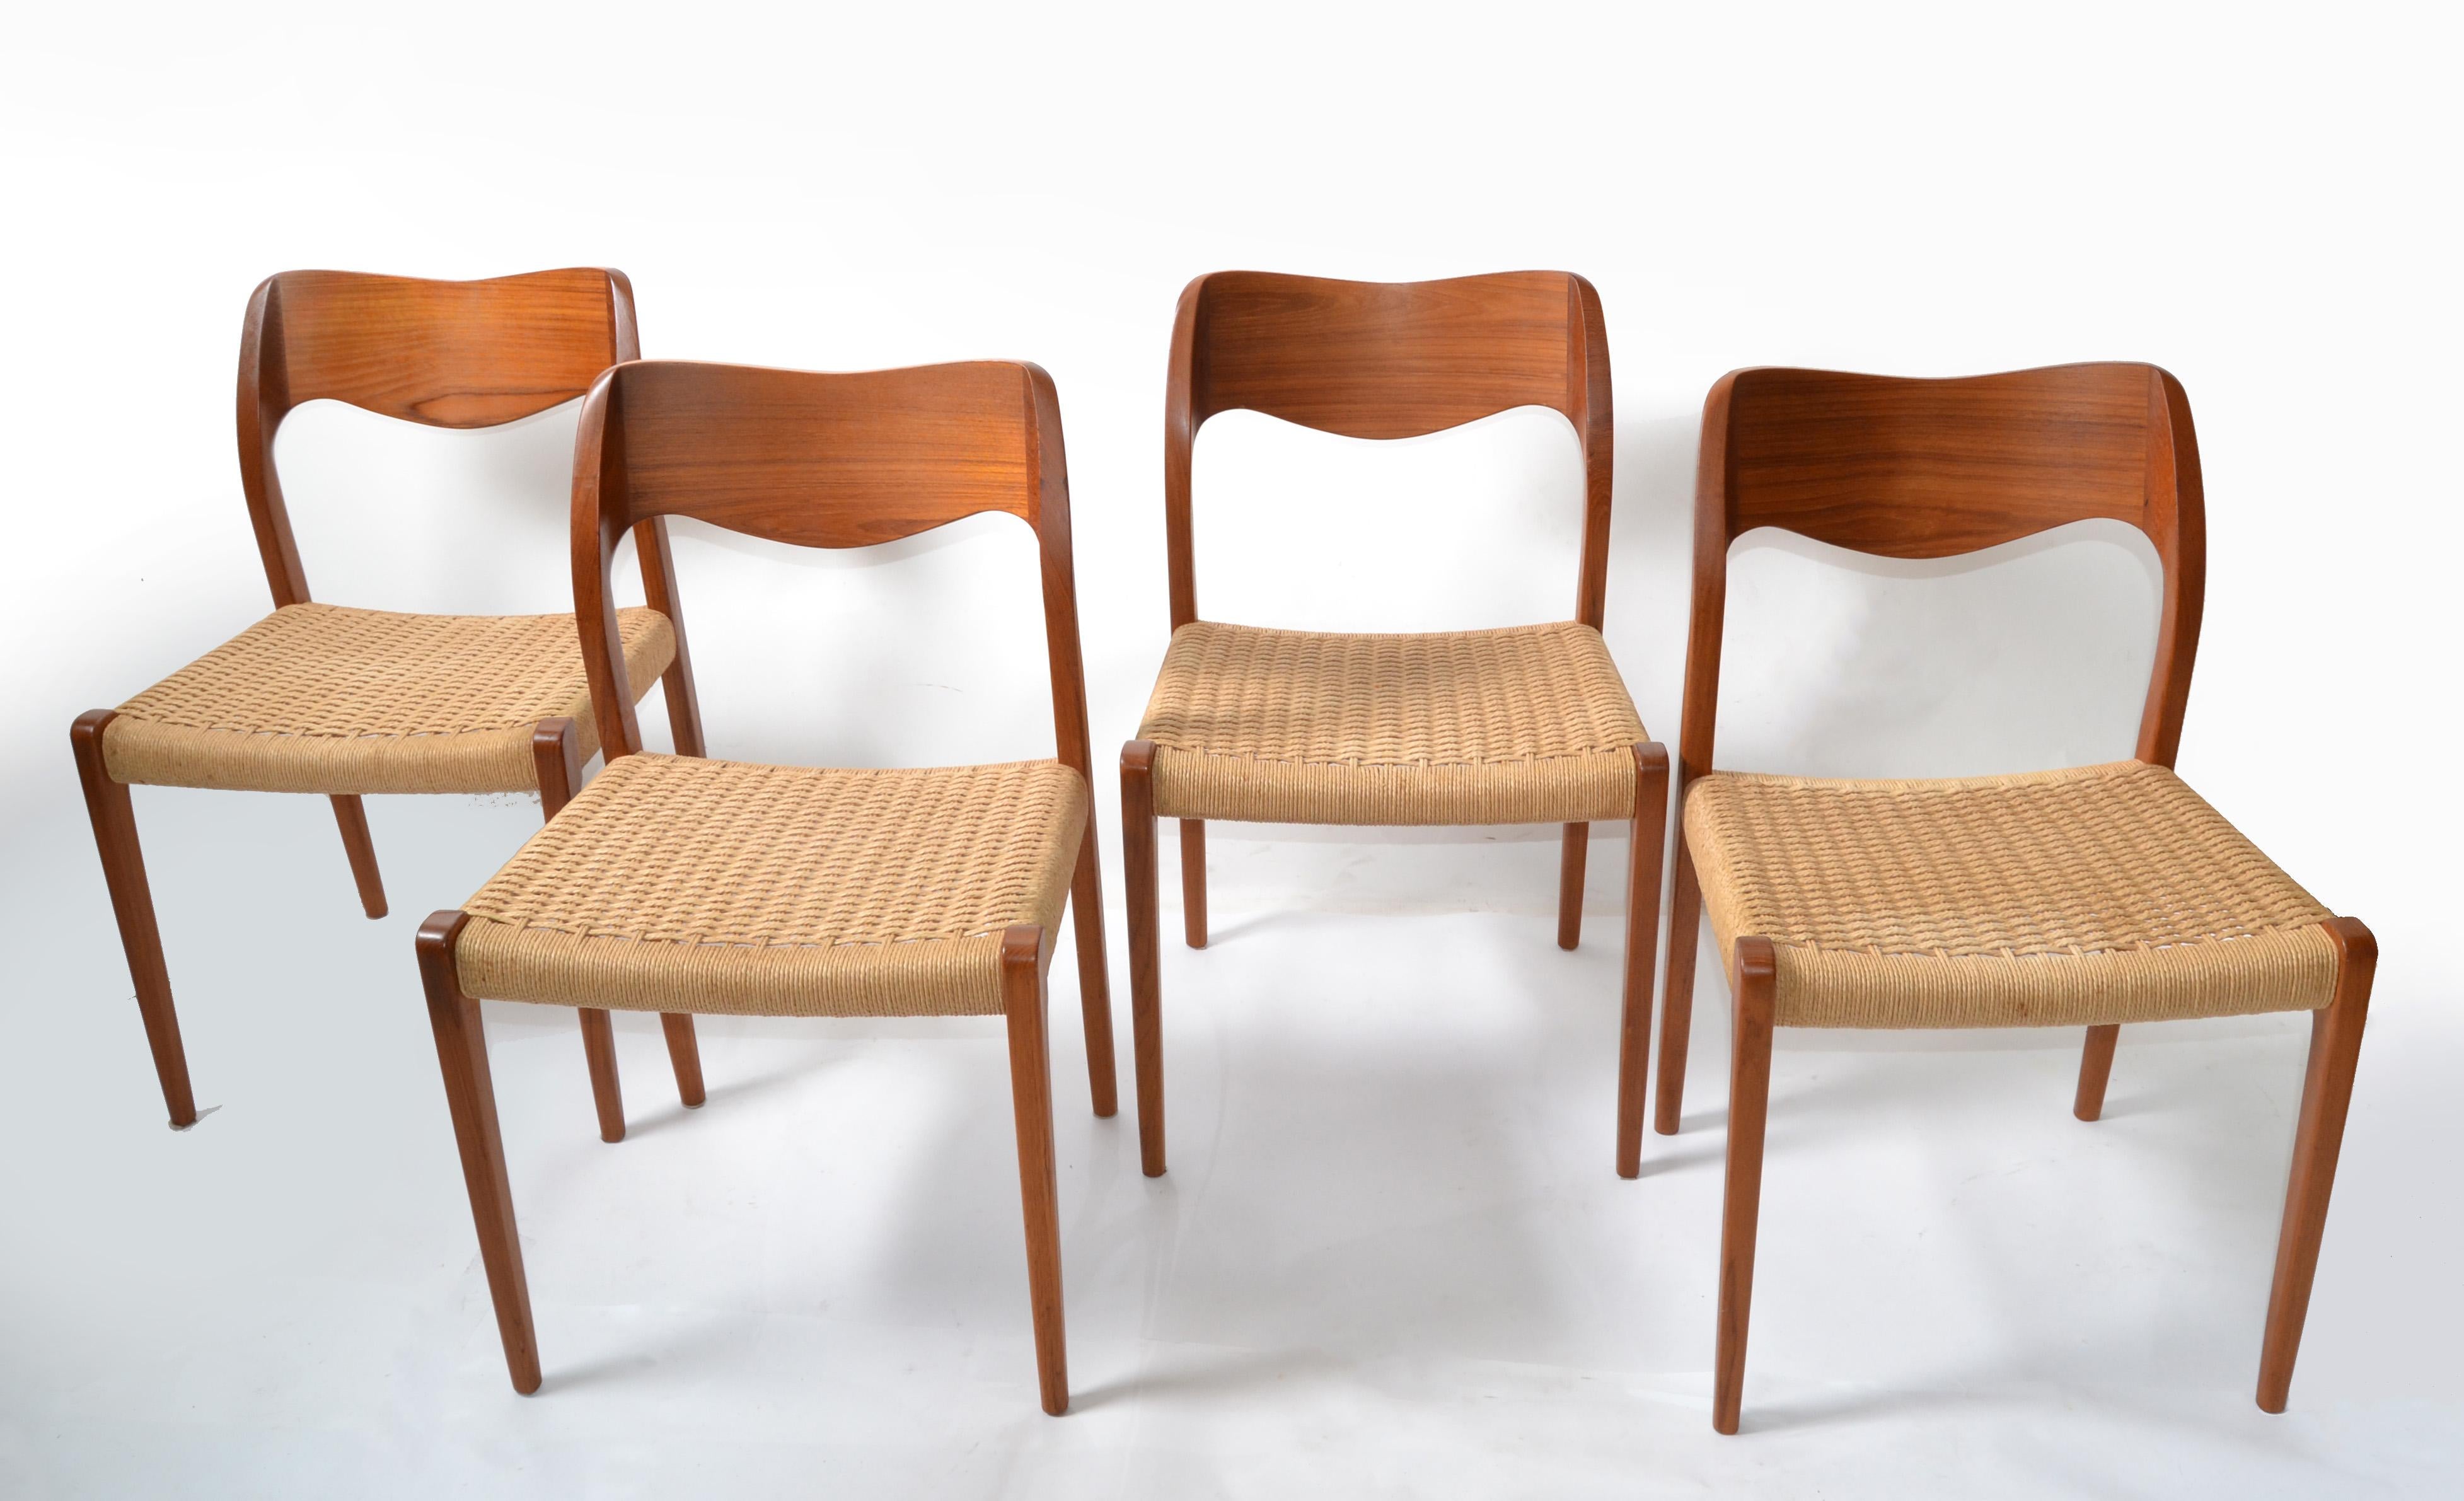 Set of 4 stylish Teak Scandinavian Modern Dining Chairs designed by Niels Otto Möller 1954, manufactured by J.L. Möller – Höjbjerg, Denmark. Model No. 71. 
Teakwood Frame upholstered with original handwoven Papercord Seat.
All chairs are marked